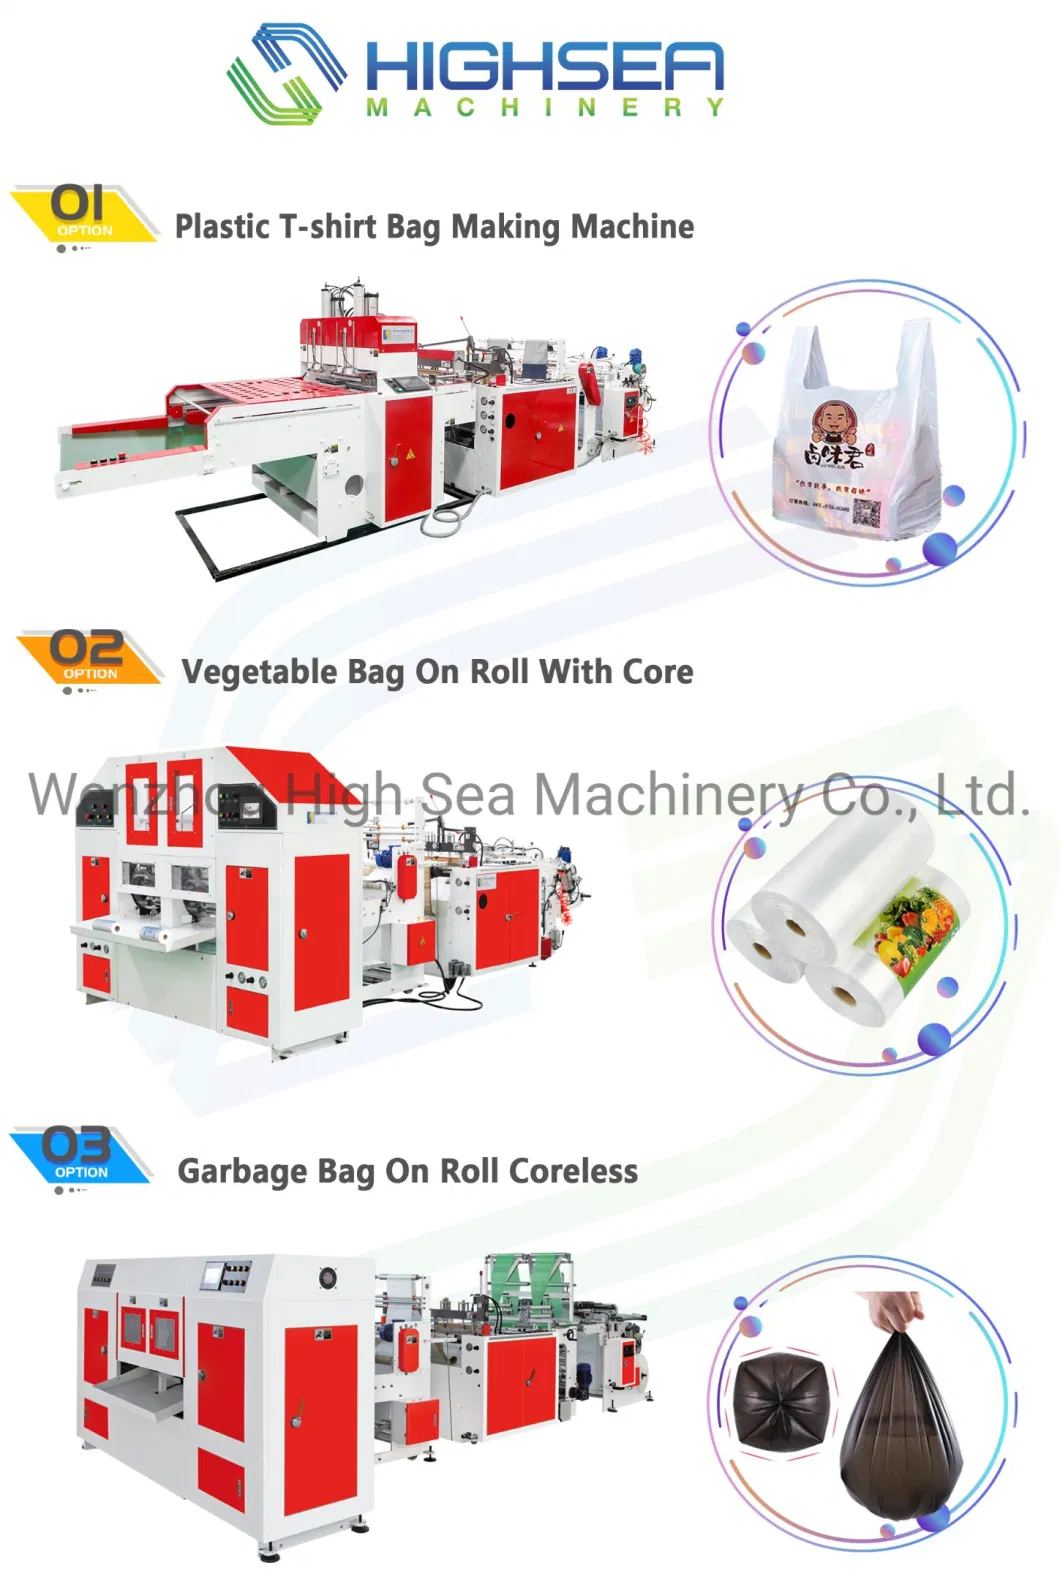 Automatic High Speed PE Nylon Poly Plastic Disposable T-Shirt Flat Bag on Roll Garbage Bag with Core Protection Package Bag Good Quality Shopping Making Machine